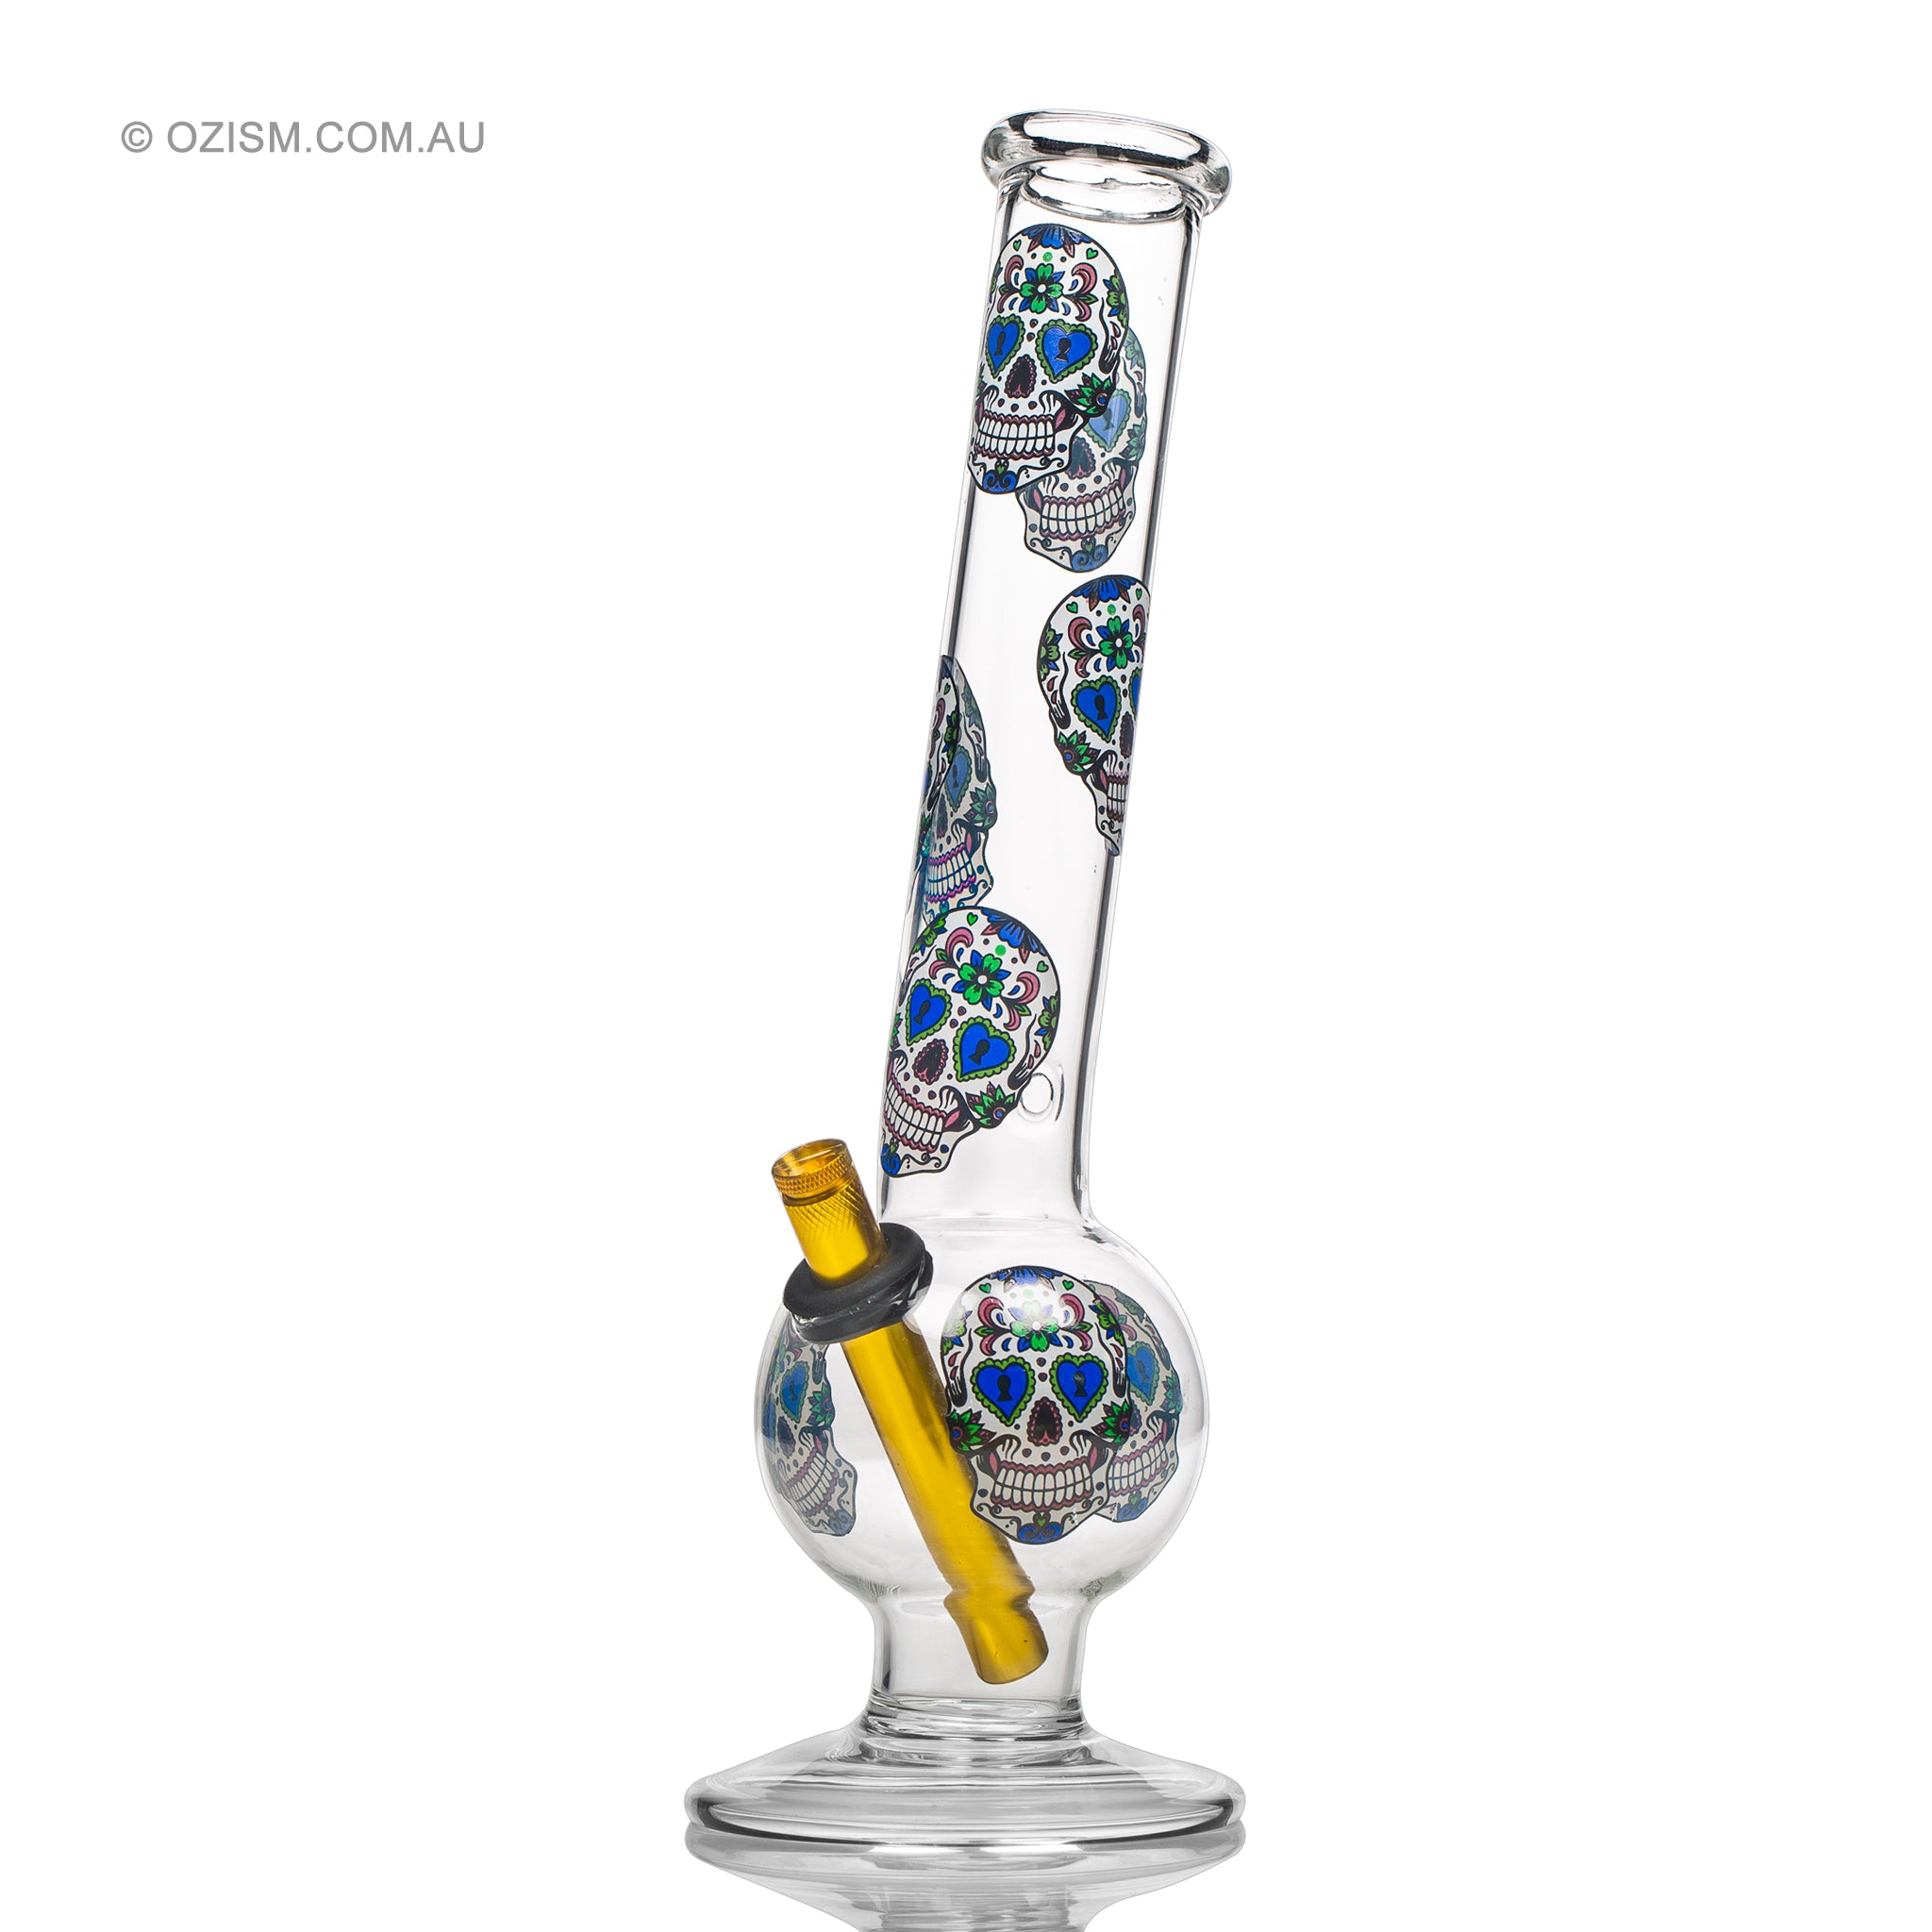 MWP glass bong with candy skull decals.